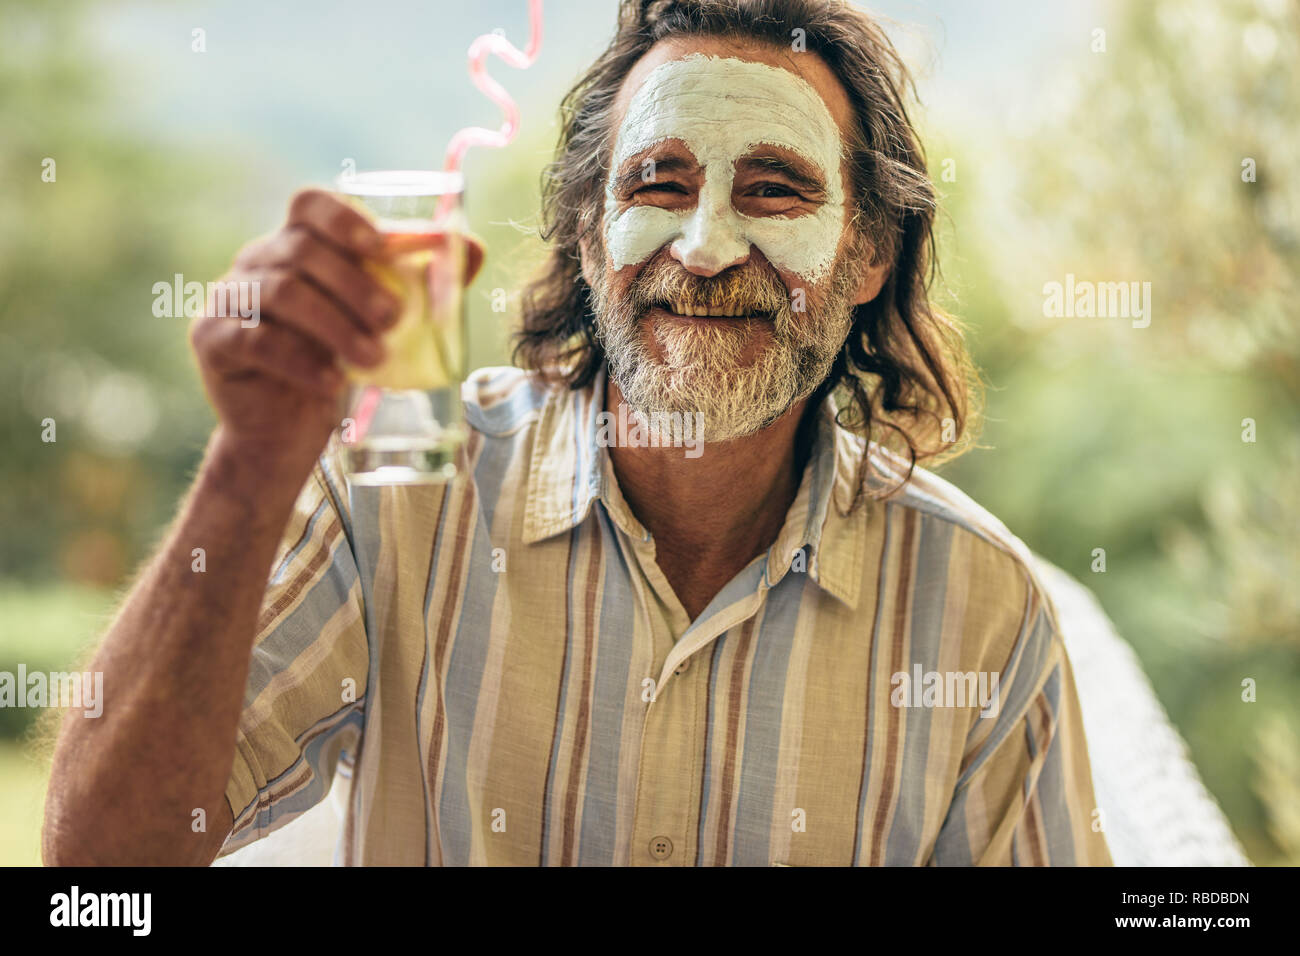 Bearded senior man with clay facial mask holding a glass of juice in hand. Man having spa facial treatment raising his juice glass at camera. Stock Photo